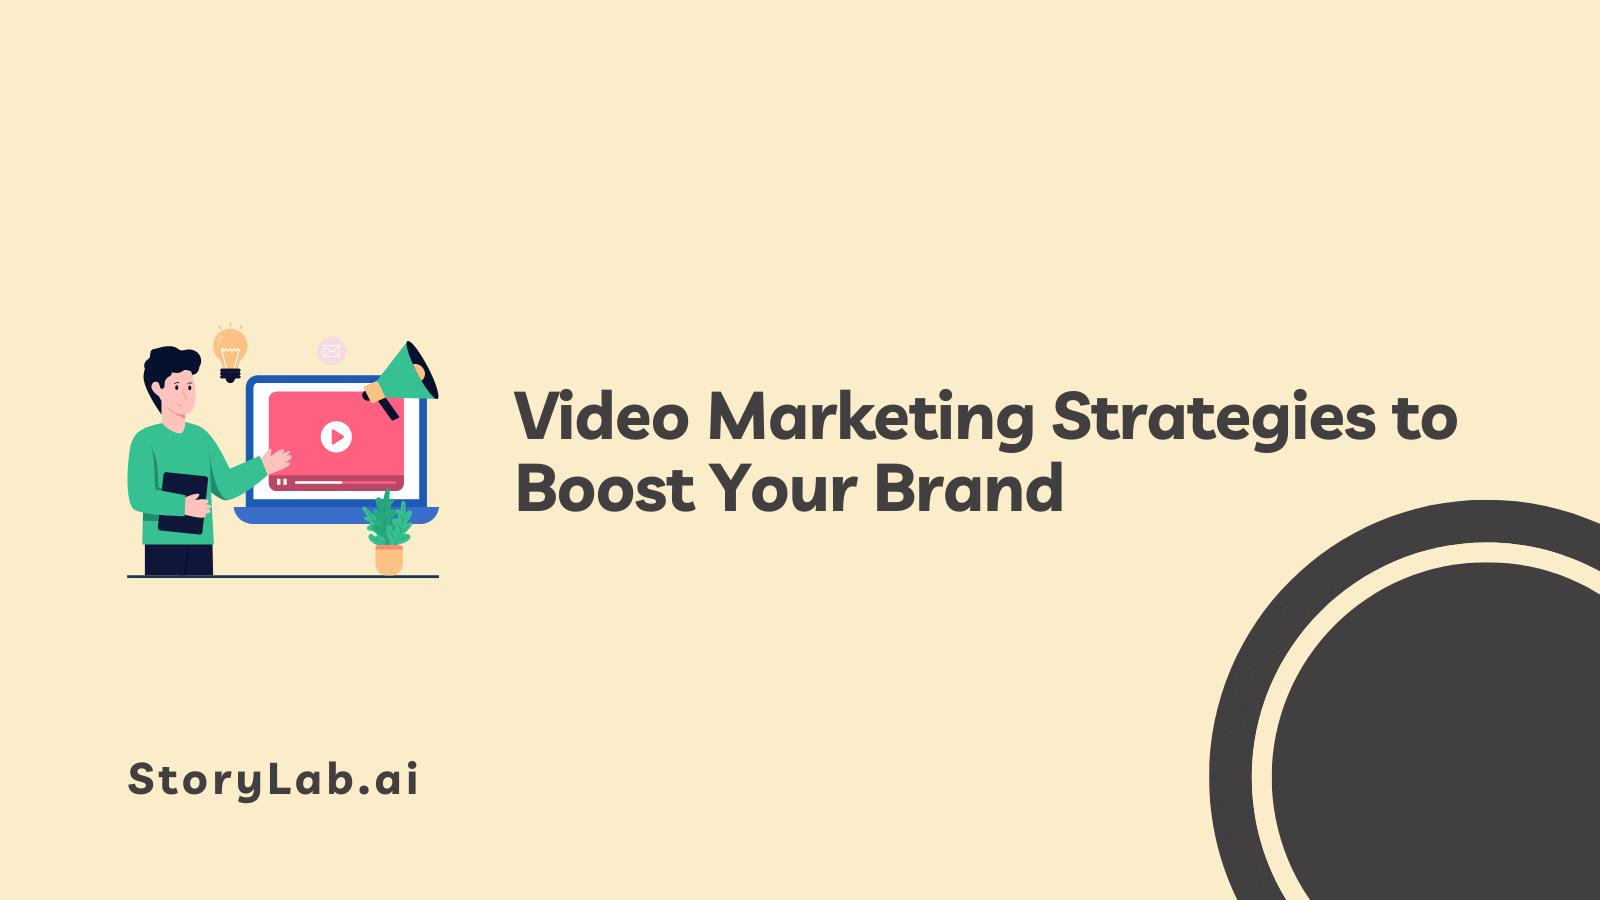 Video Marketing Strategies to Boost Your Brand